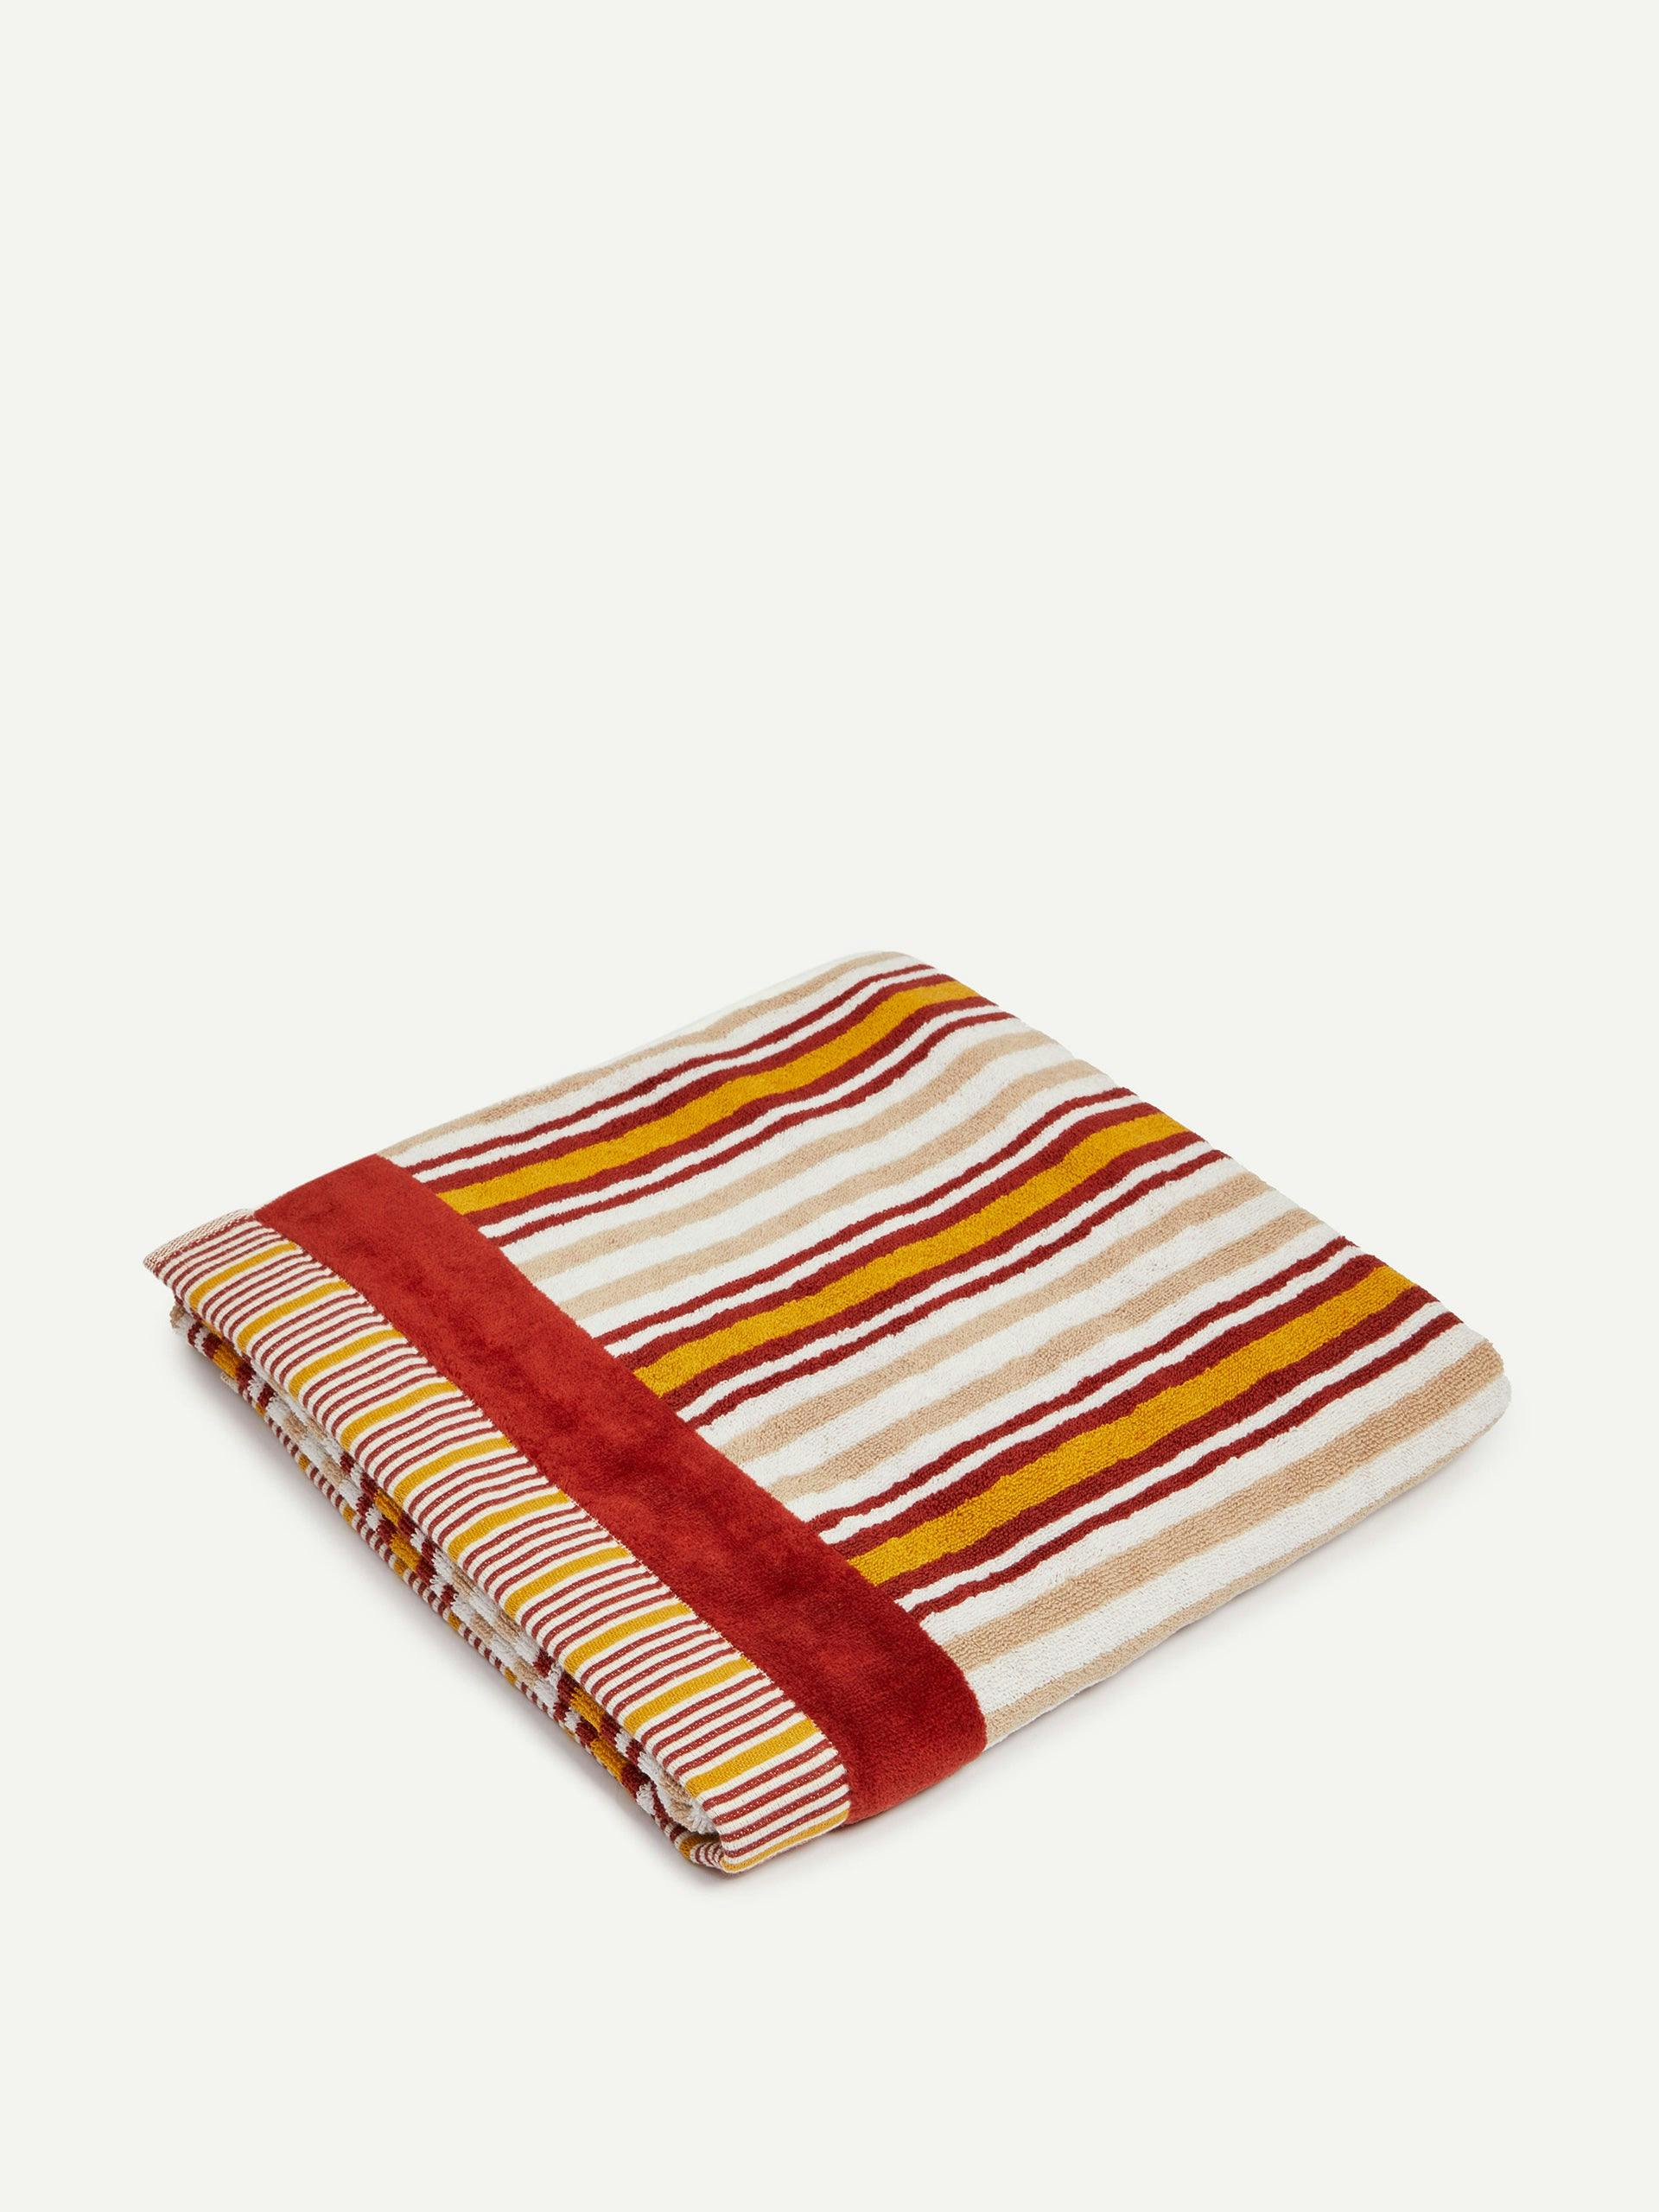 Red and orange striped hand towel